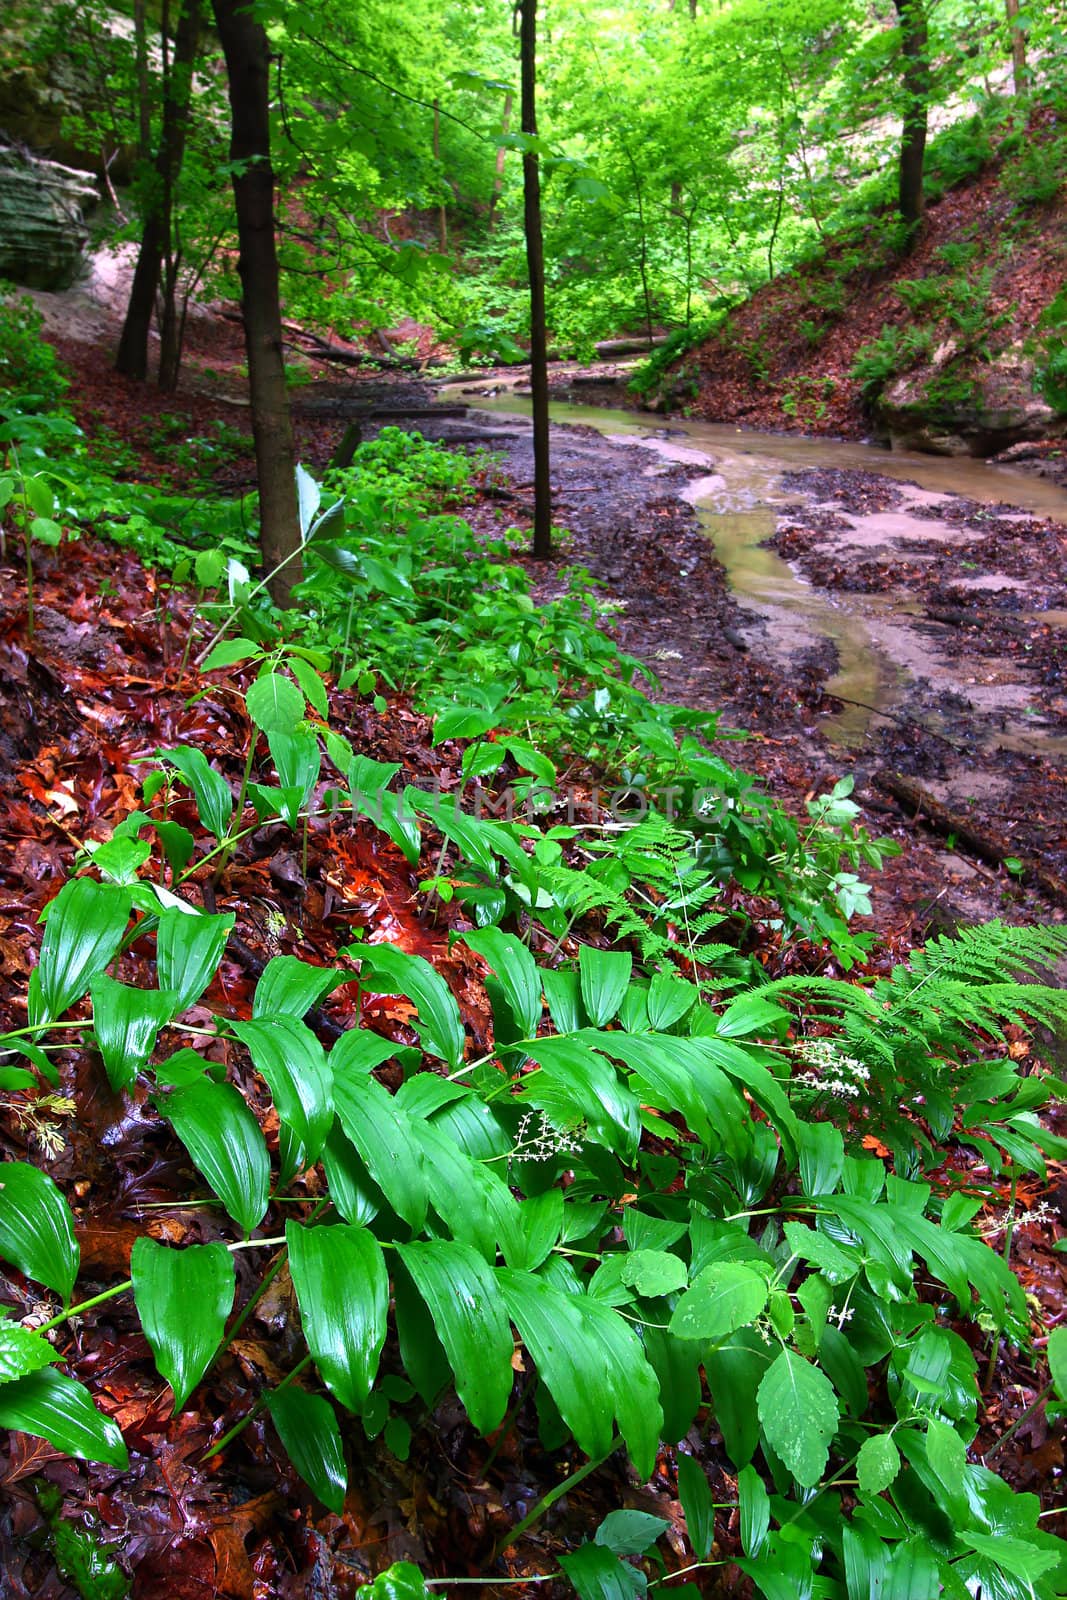 Lush vegetation grows quickly with spring rains at Starved Rock State Park.